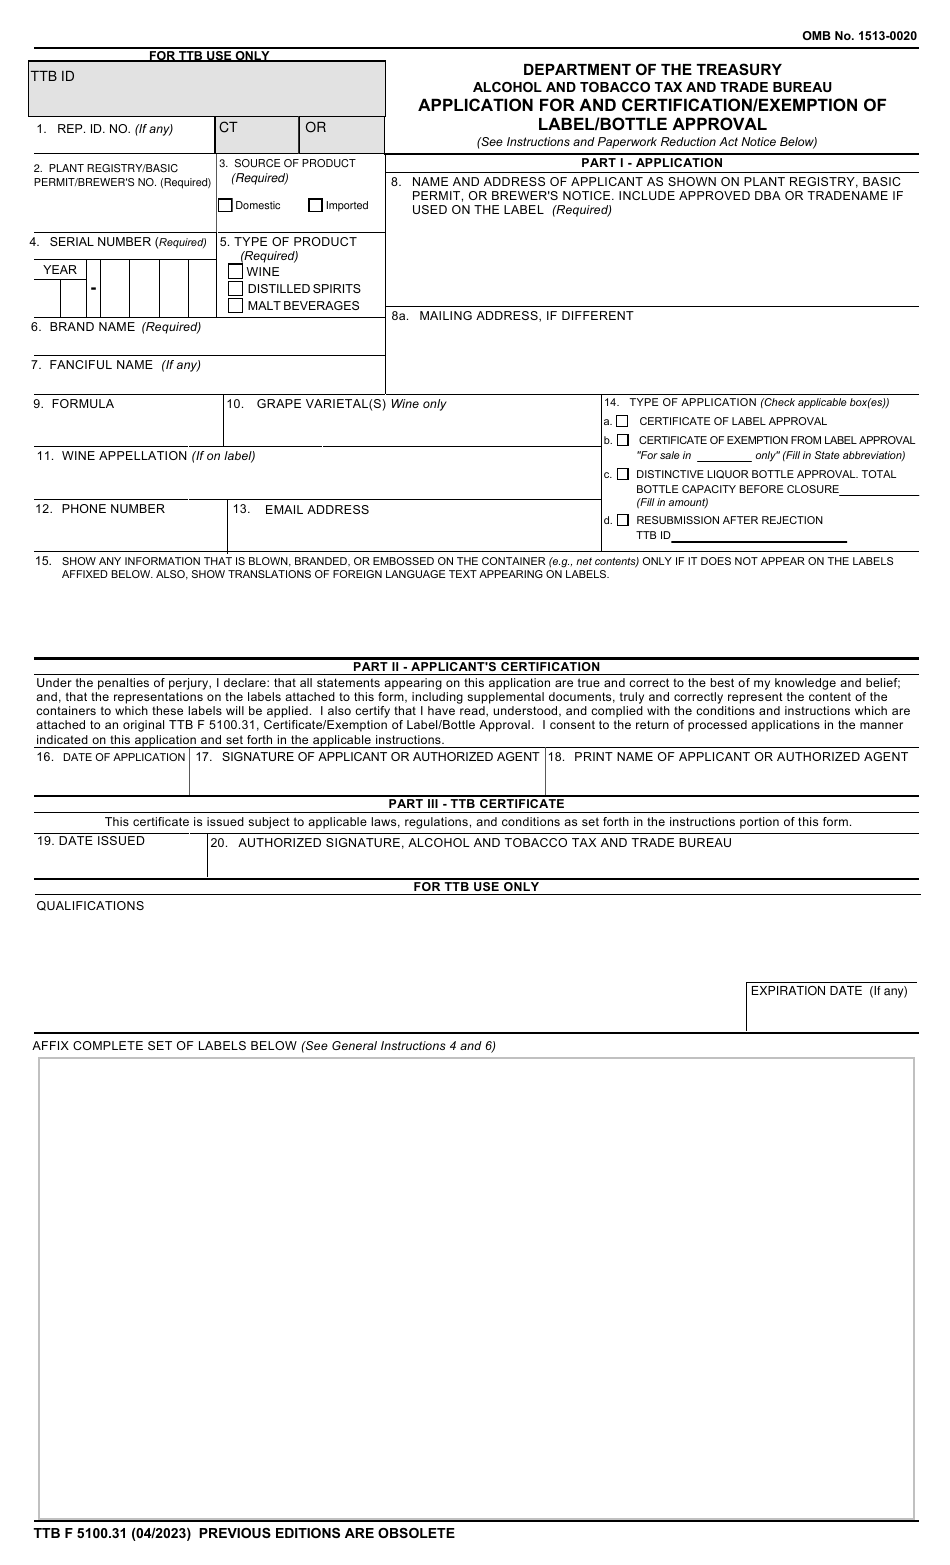 TTB Form 5100.31 Application for and Certification / Exemption of Label / Bottle Approval, Page 1